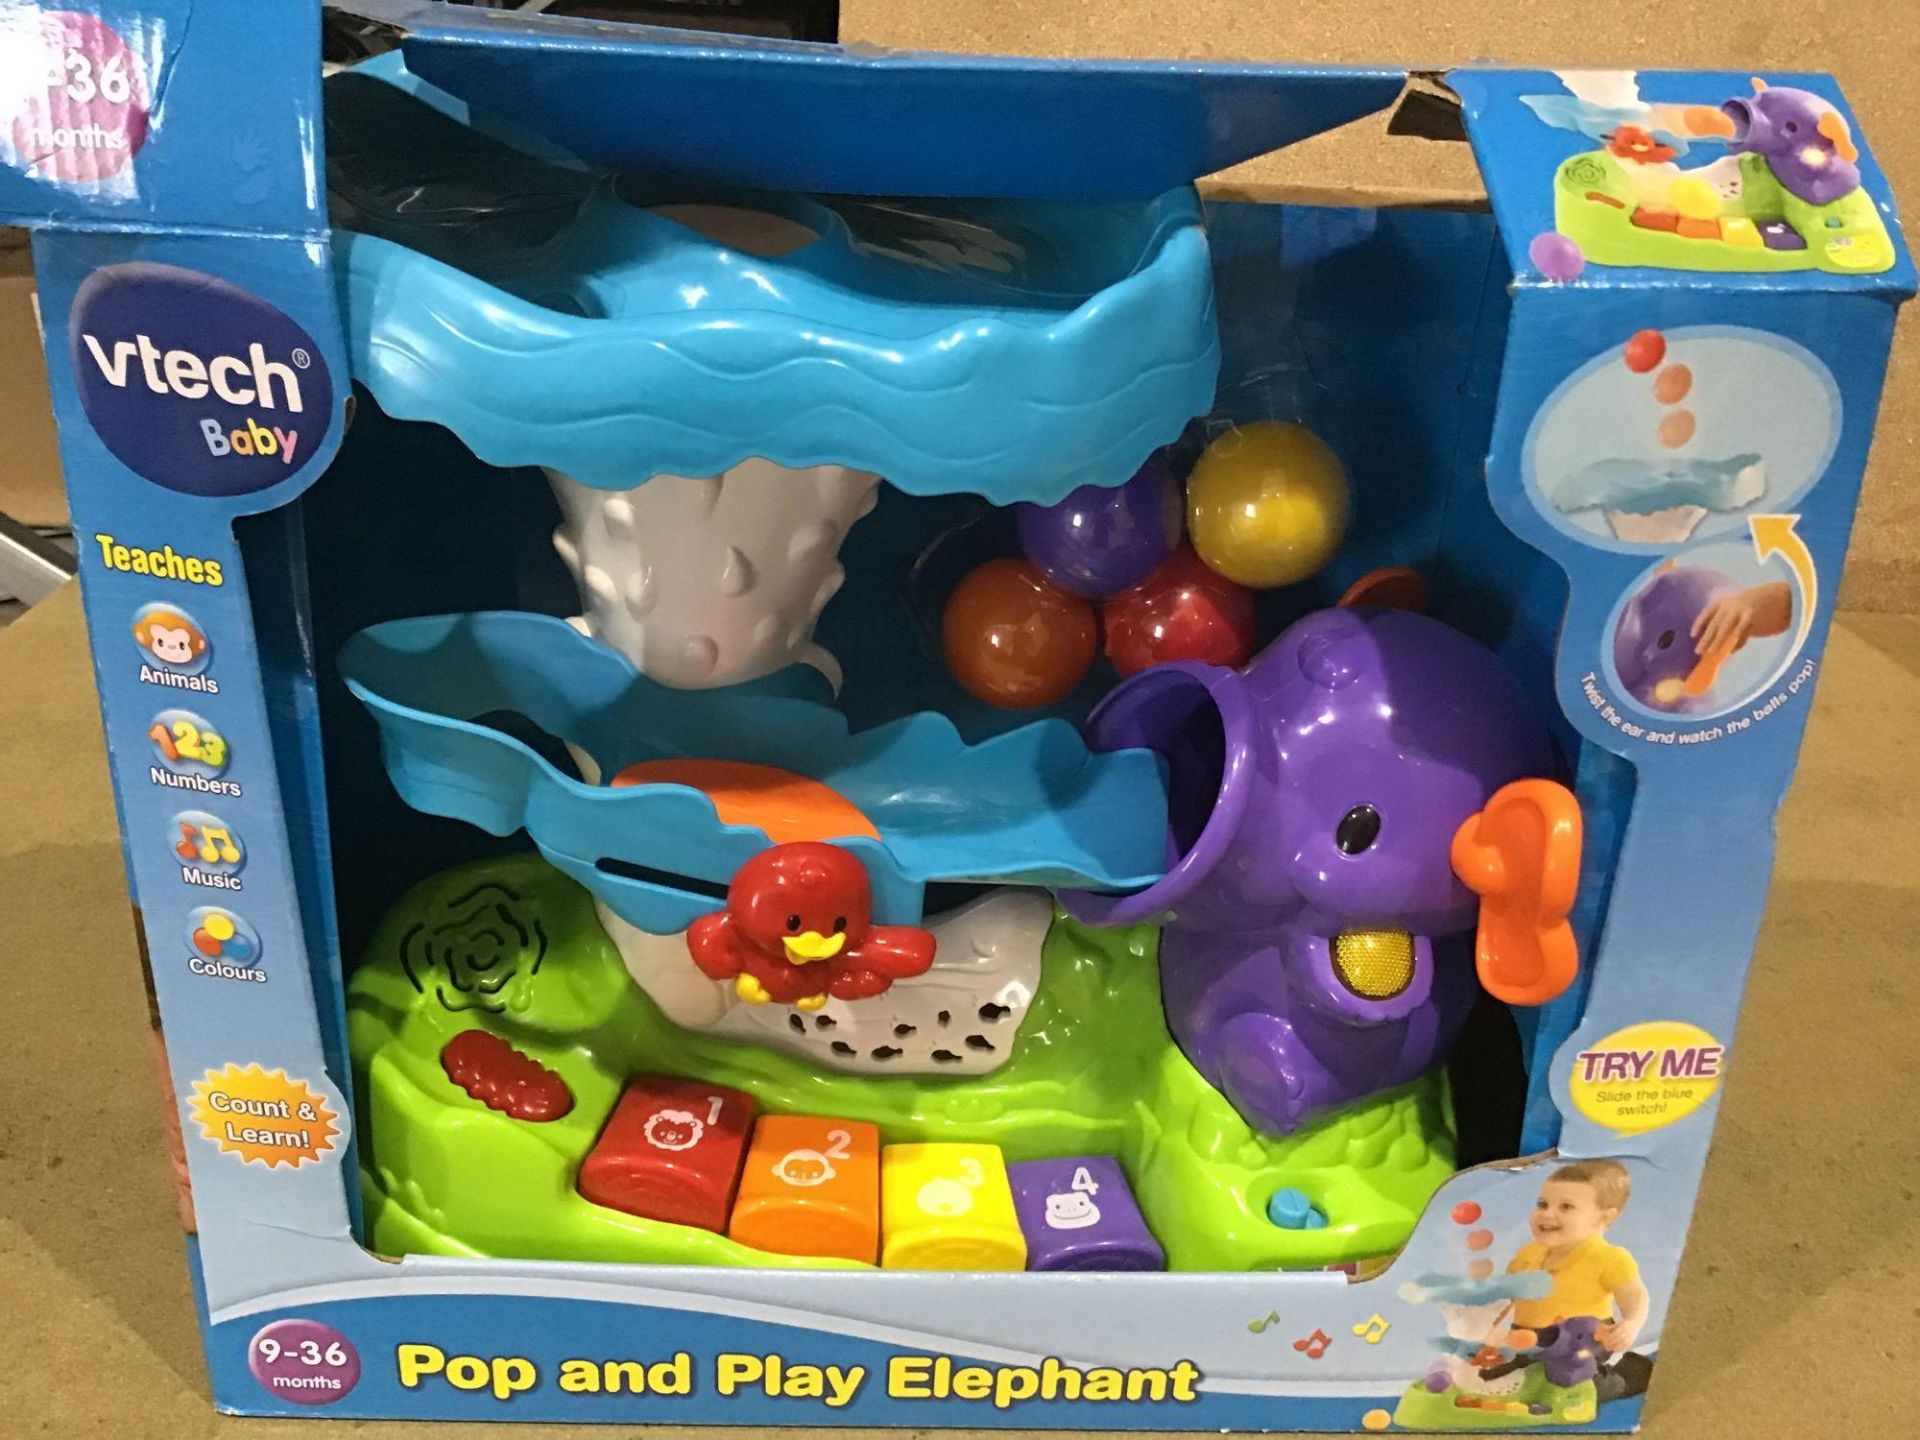 VTech Pop and Play Elephant - £34.00 RRP